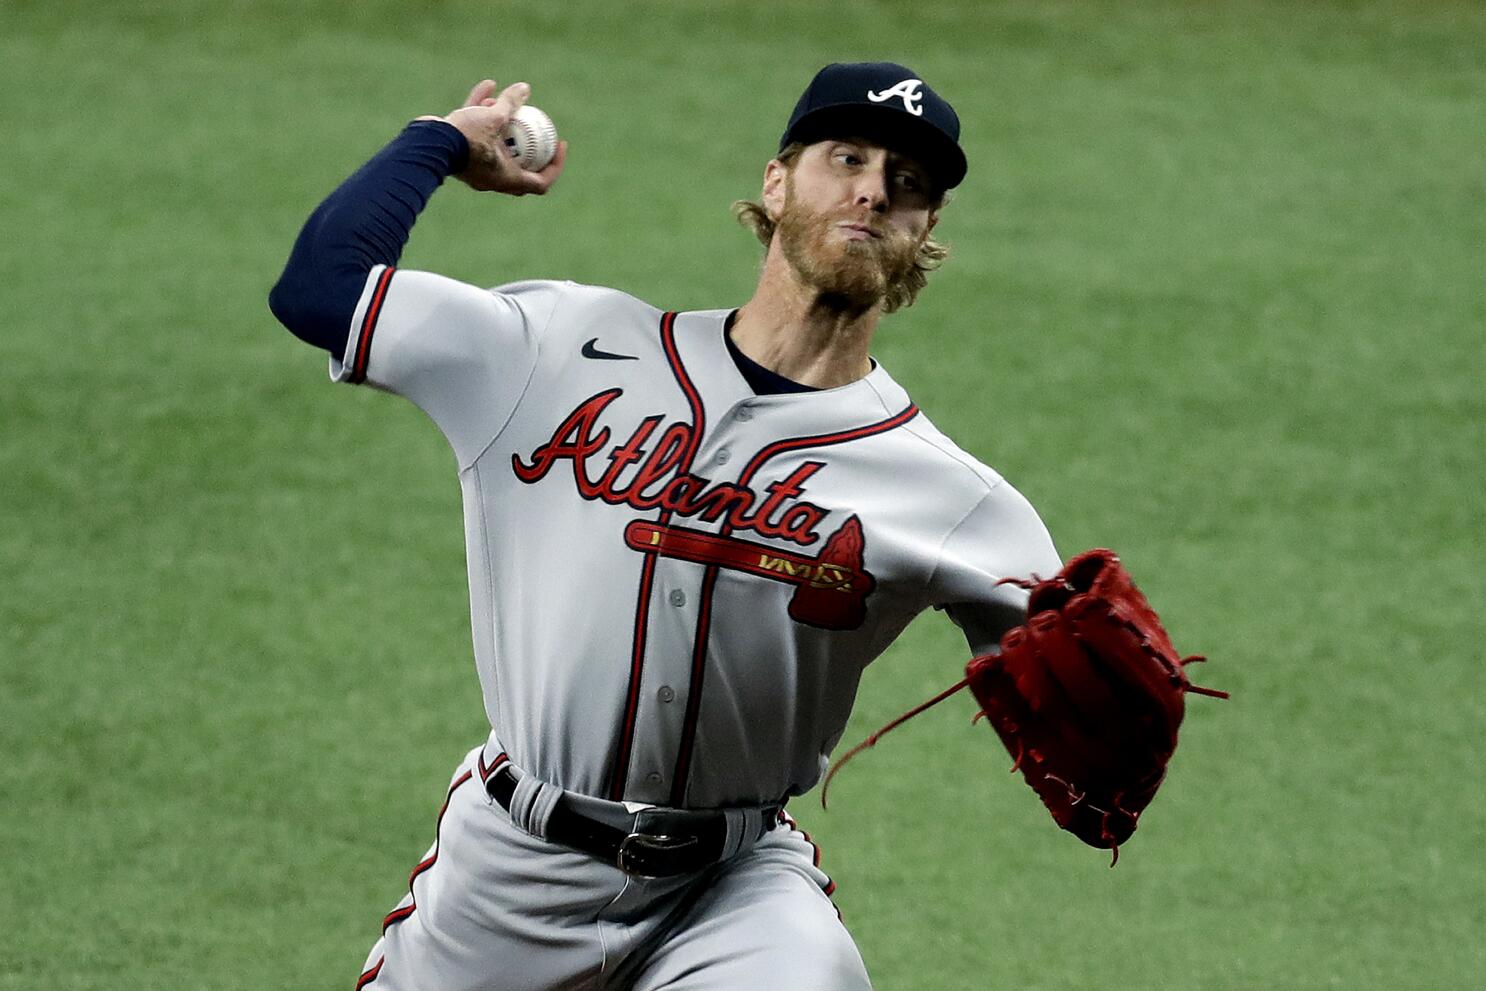 Let's Play! MLB announces 2020 60-Game Braves Schedule - The Aha! Connection